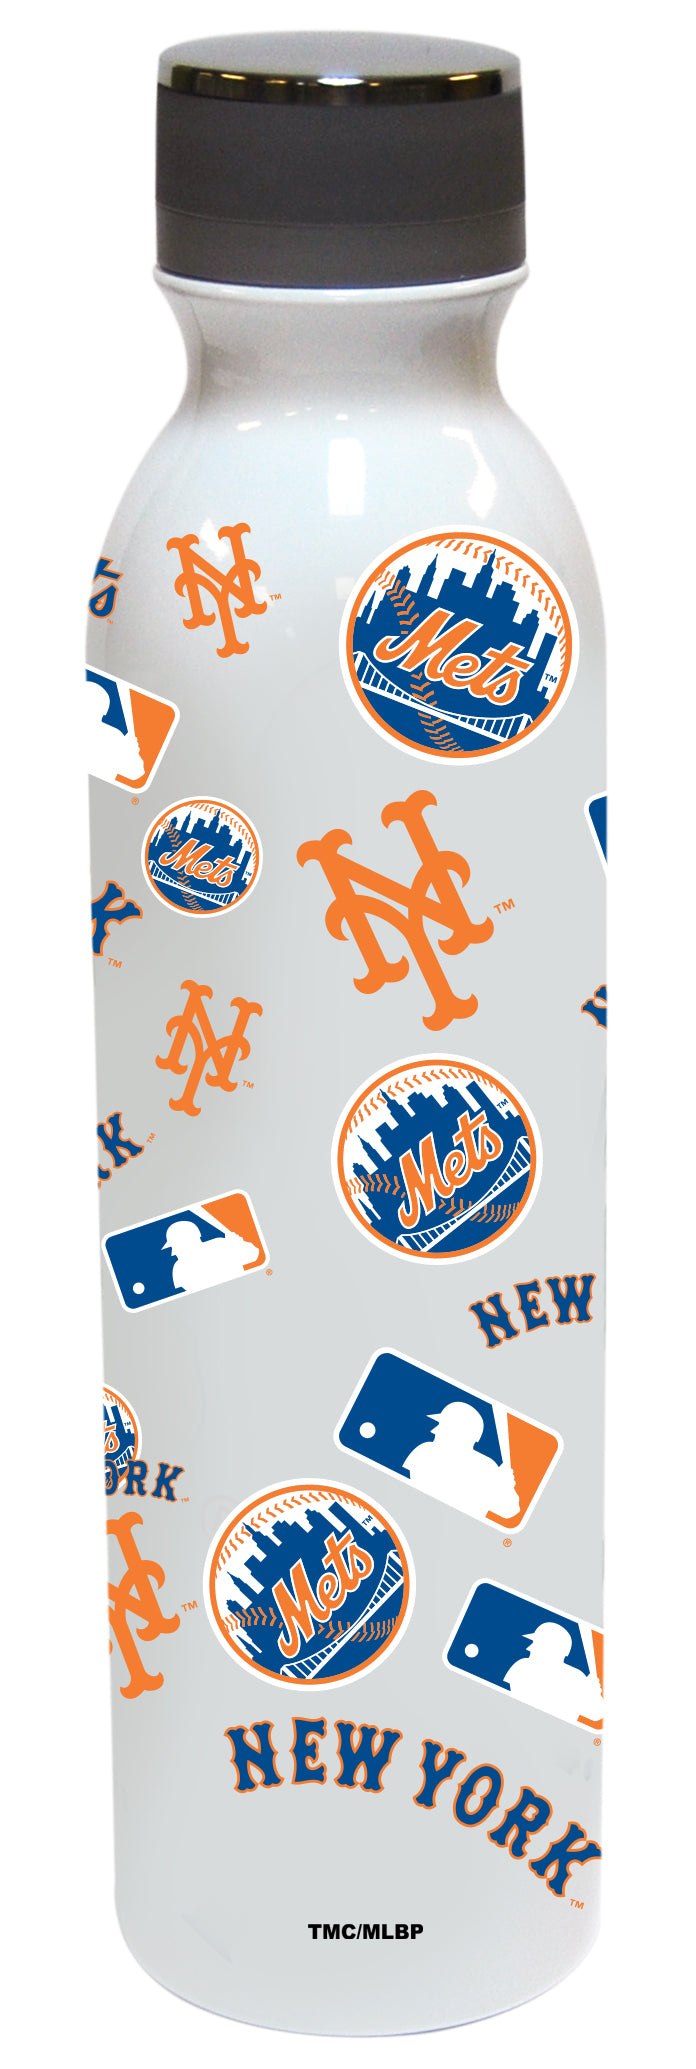 24oz SS All Over Print Bttl METS
CurrentProduct, Drinkware_category_All, MLB, New York Mets, NYM
The Memory Company